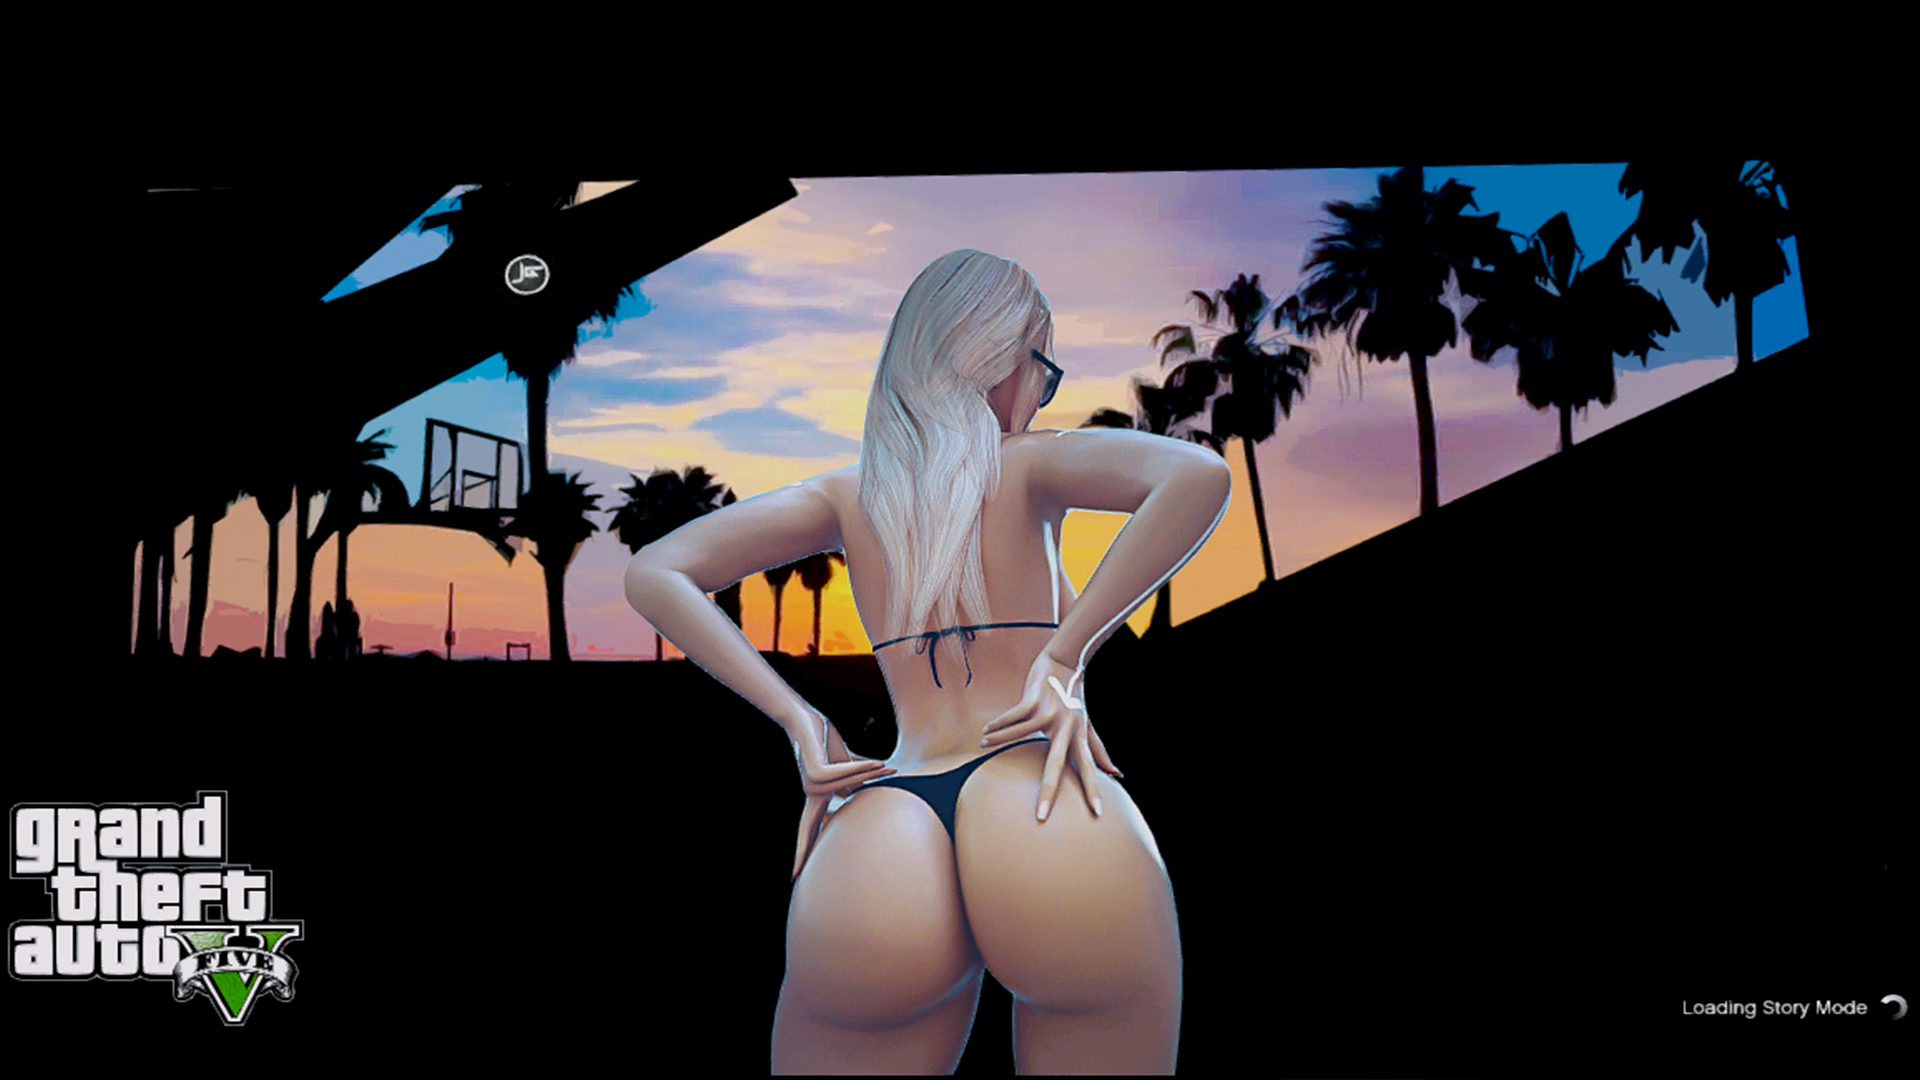 Best of Gta 5 sexy moments